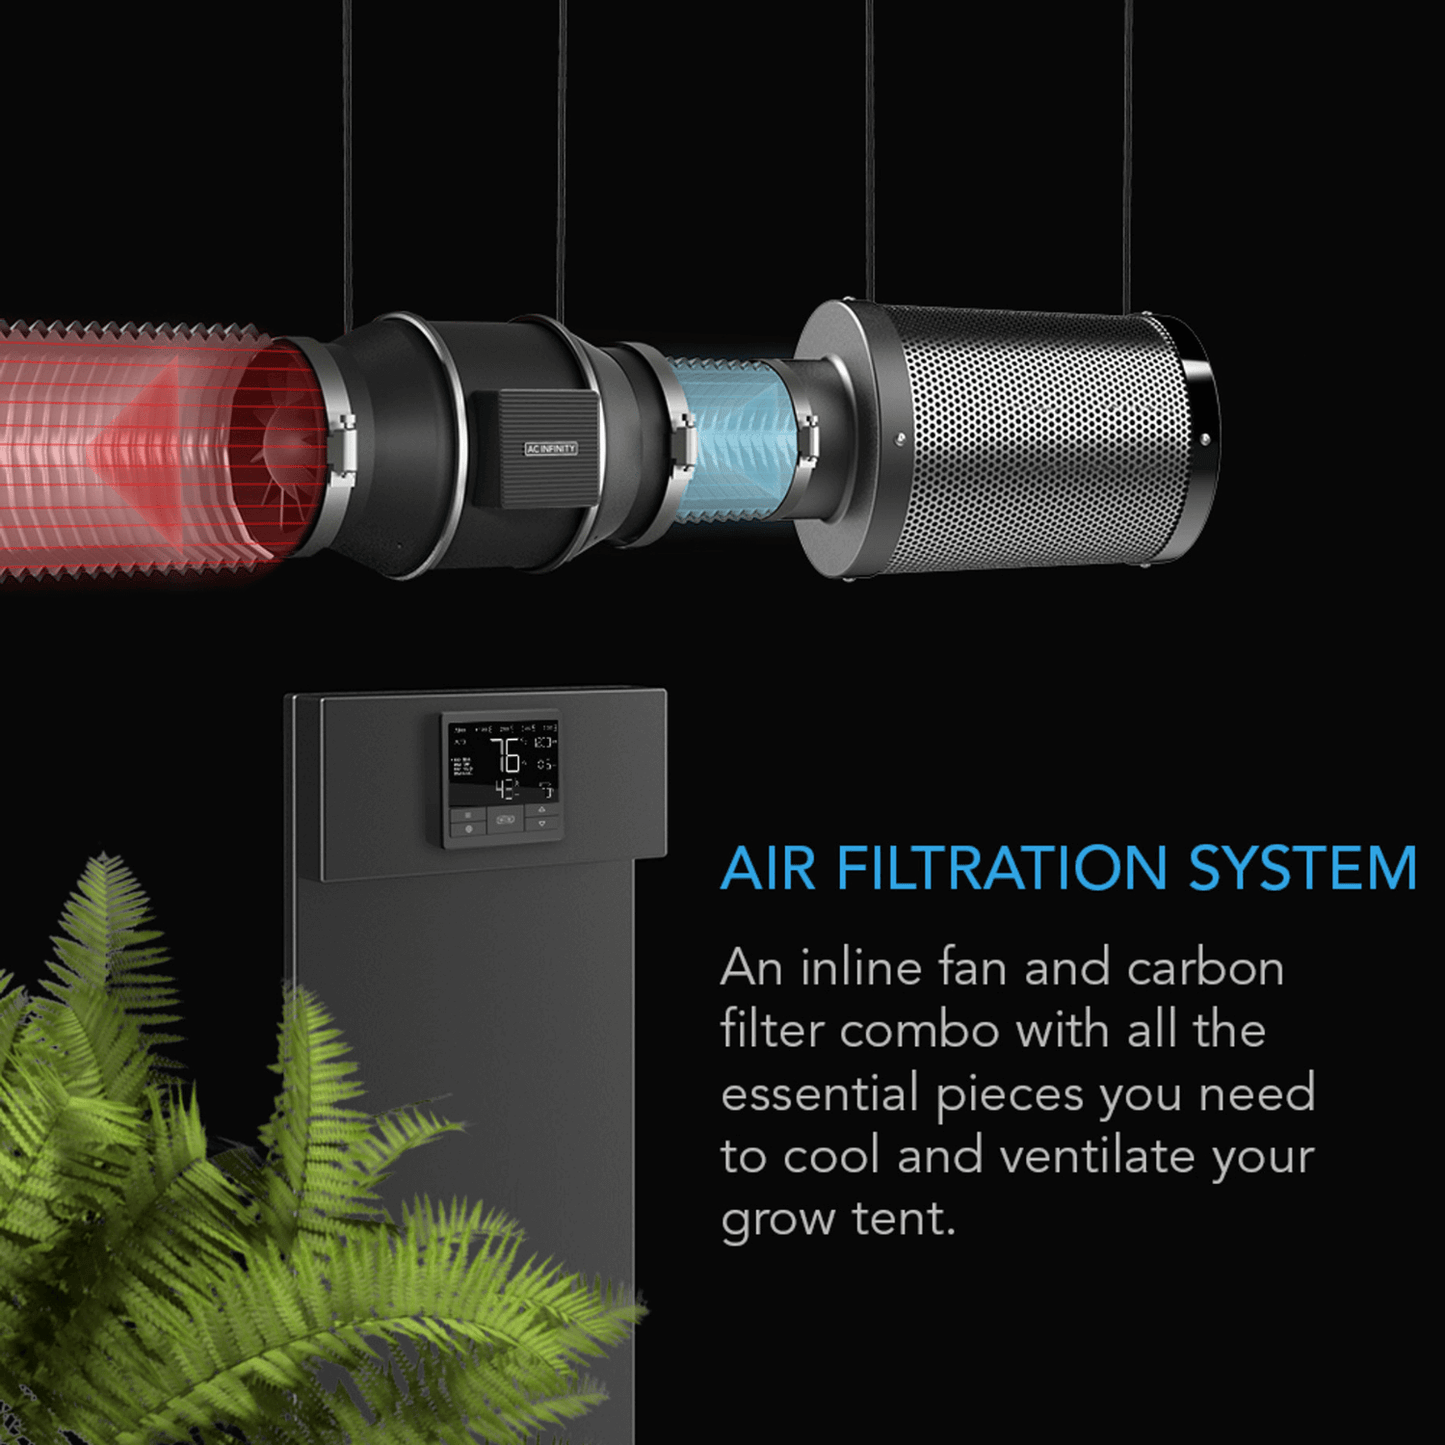 AC Infinity Air Filtration Kit PRO 8", Inline Fan with Smart Controller, Carbon Filter & Ducting Combo | AC-FKT8 | Grow Tents Depot | Climate Control | 819137022980